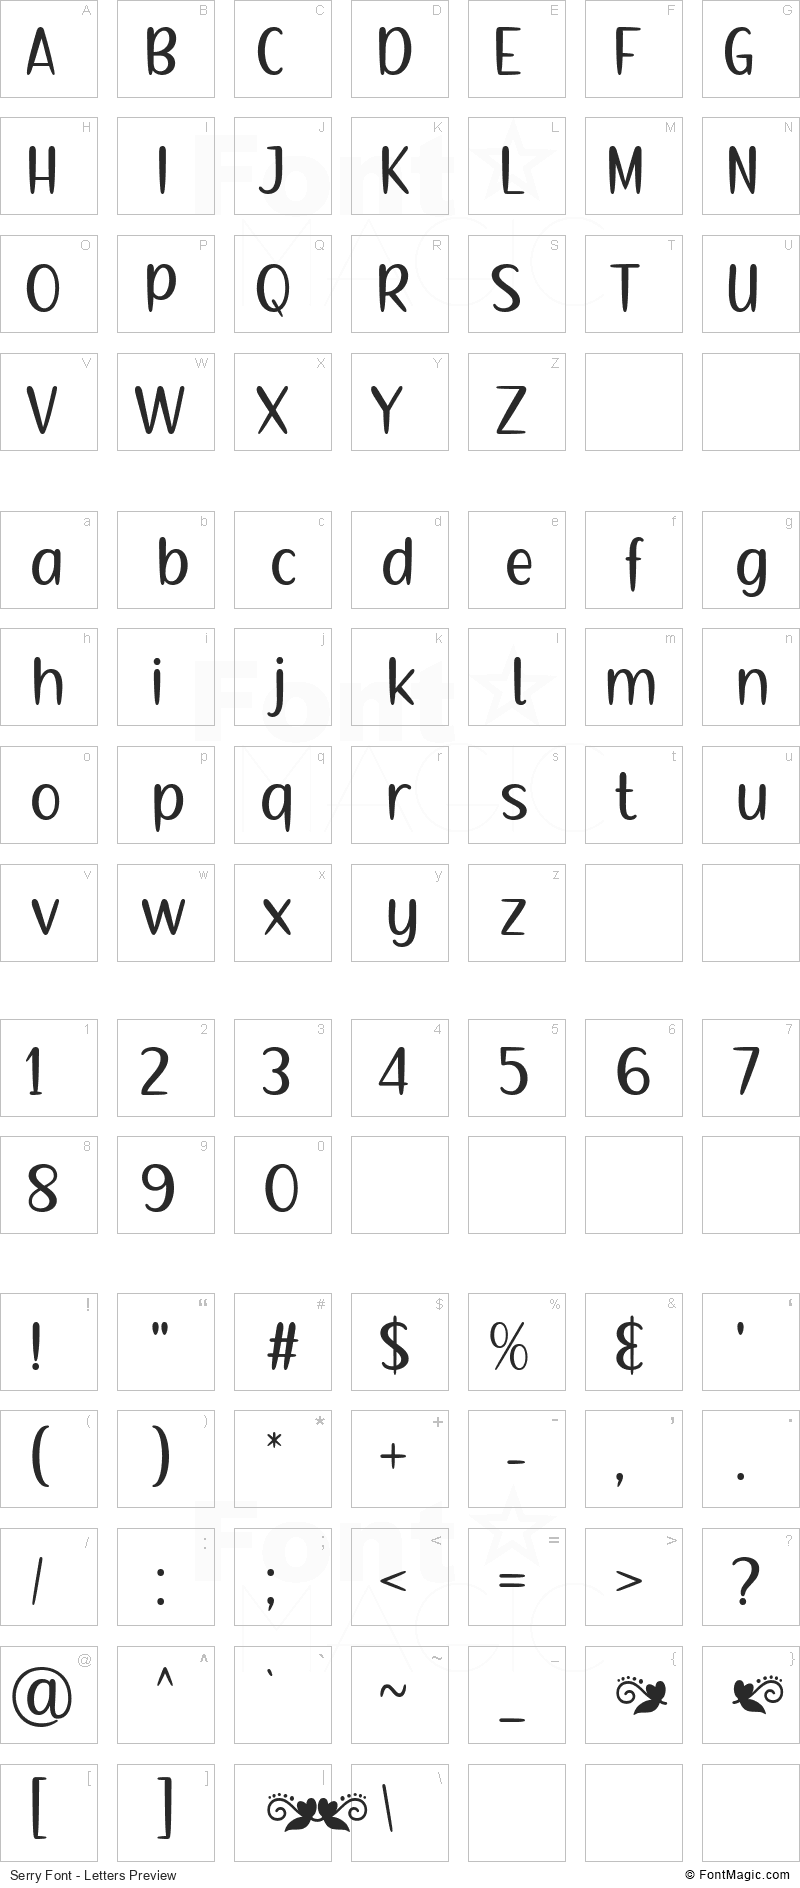 Serry Font - All Latters Preview Chart